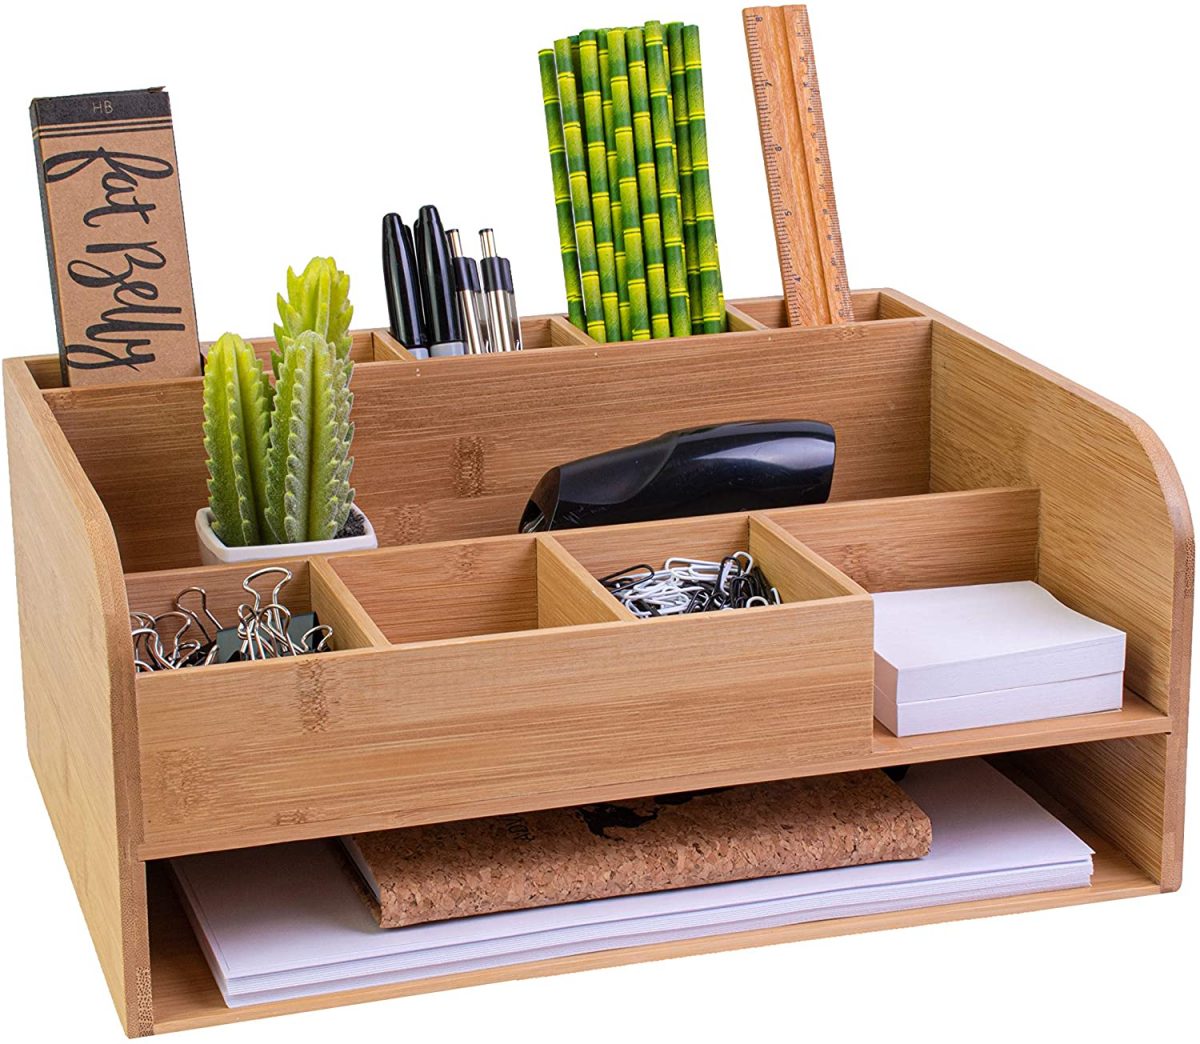 100 Best Office Desk Storage That Cannot Be Missed | Storables